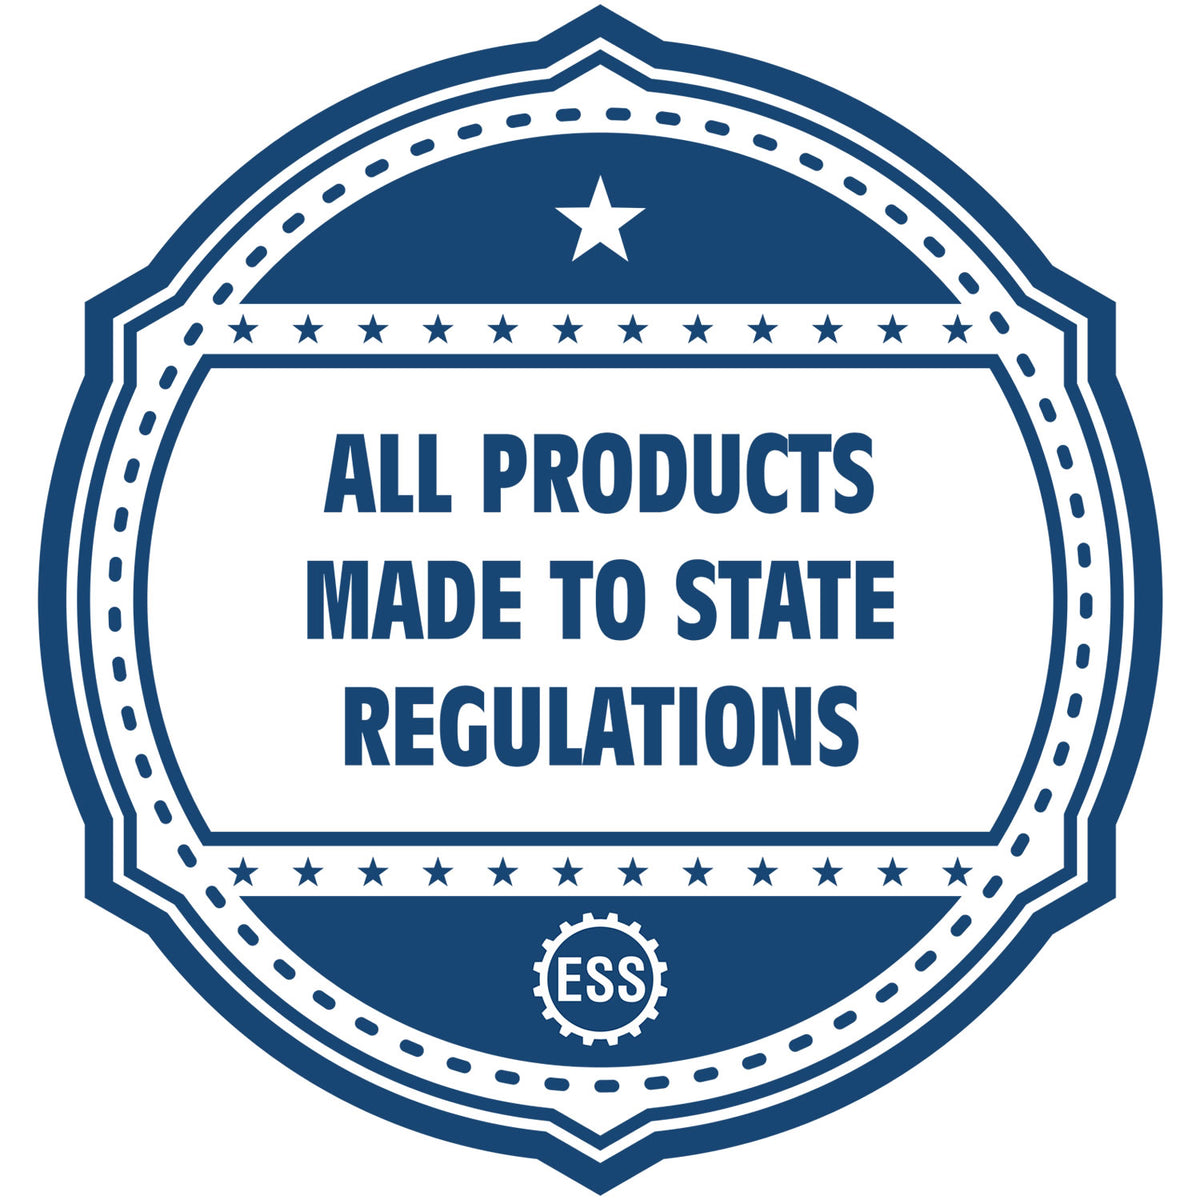 An icon or badge element for the Slim Pre-Inked Vermont Land Surveyor Seal Stamp showing that this product is made in compliance with state regulations.